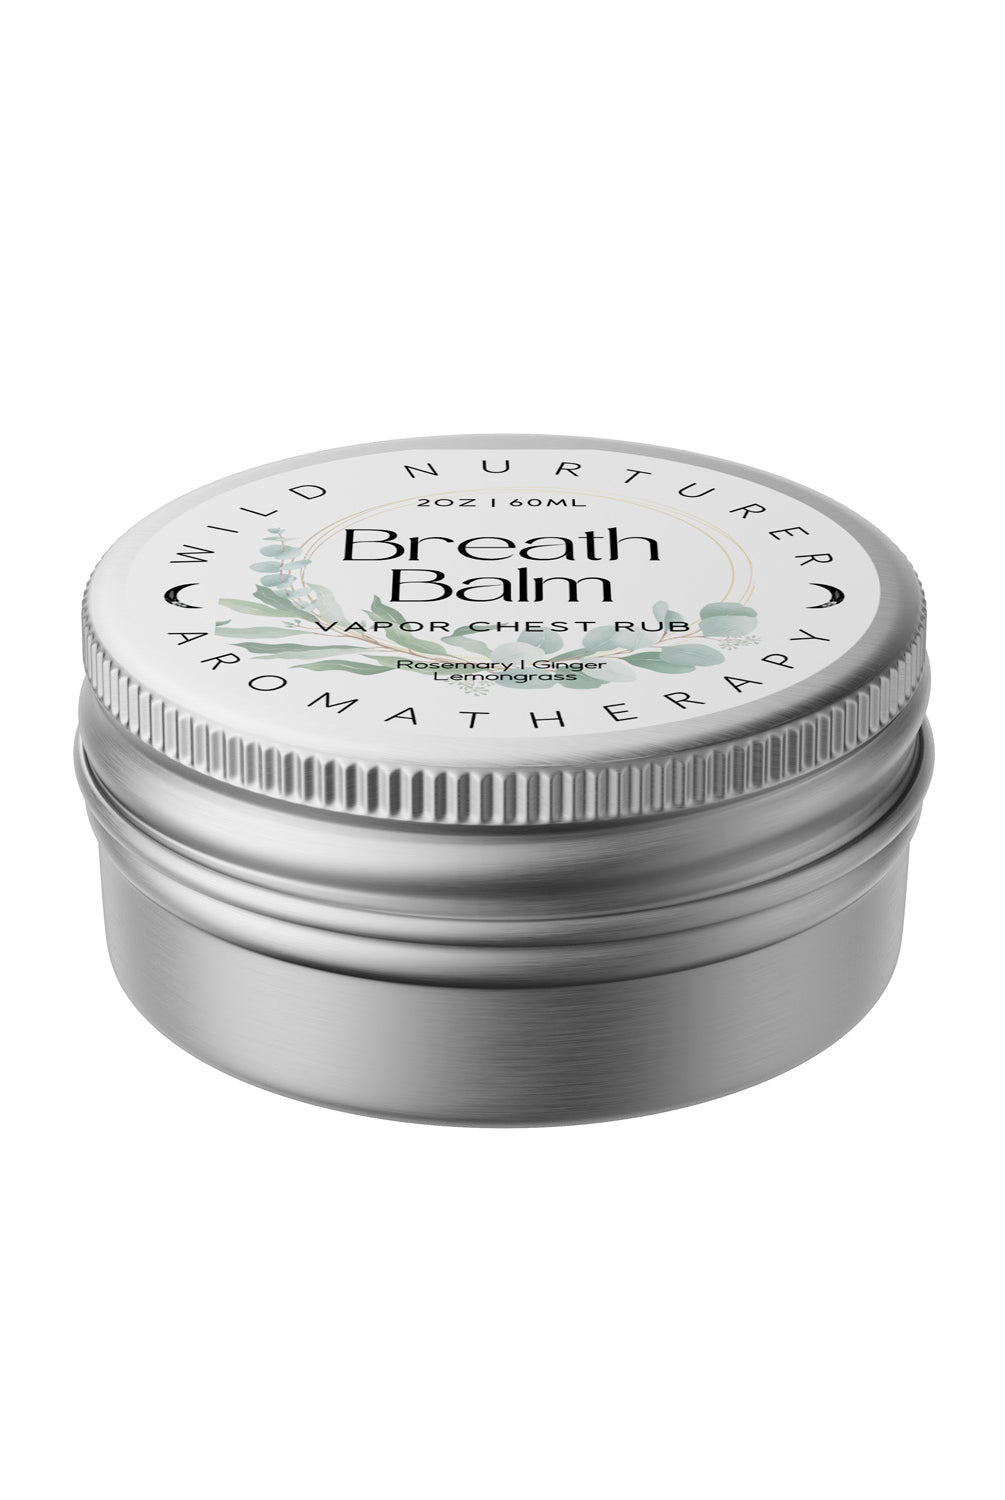 A small metal tin labeled "Breathe Rub: 2oz Chest & Head Vapor Rub | Upper Respiratory Ointment | Family Cold & Flu Support" by Wild Nurturer Aromatherapy on a white background.